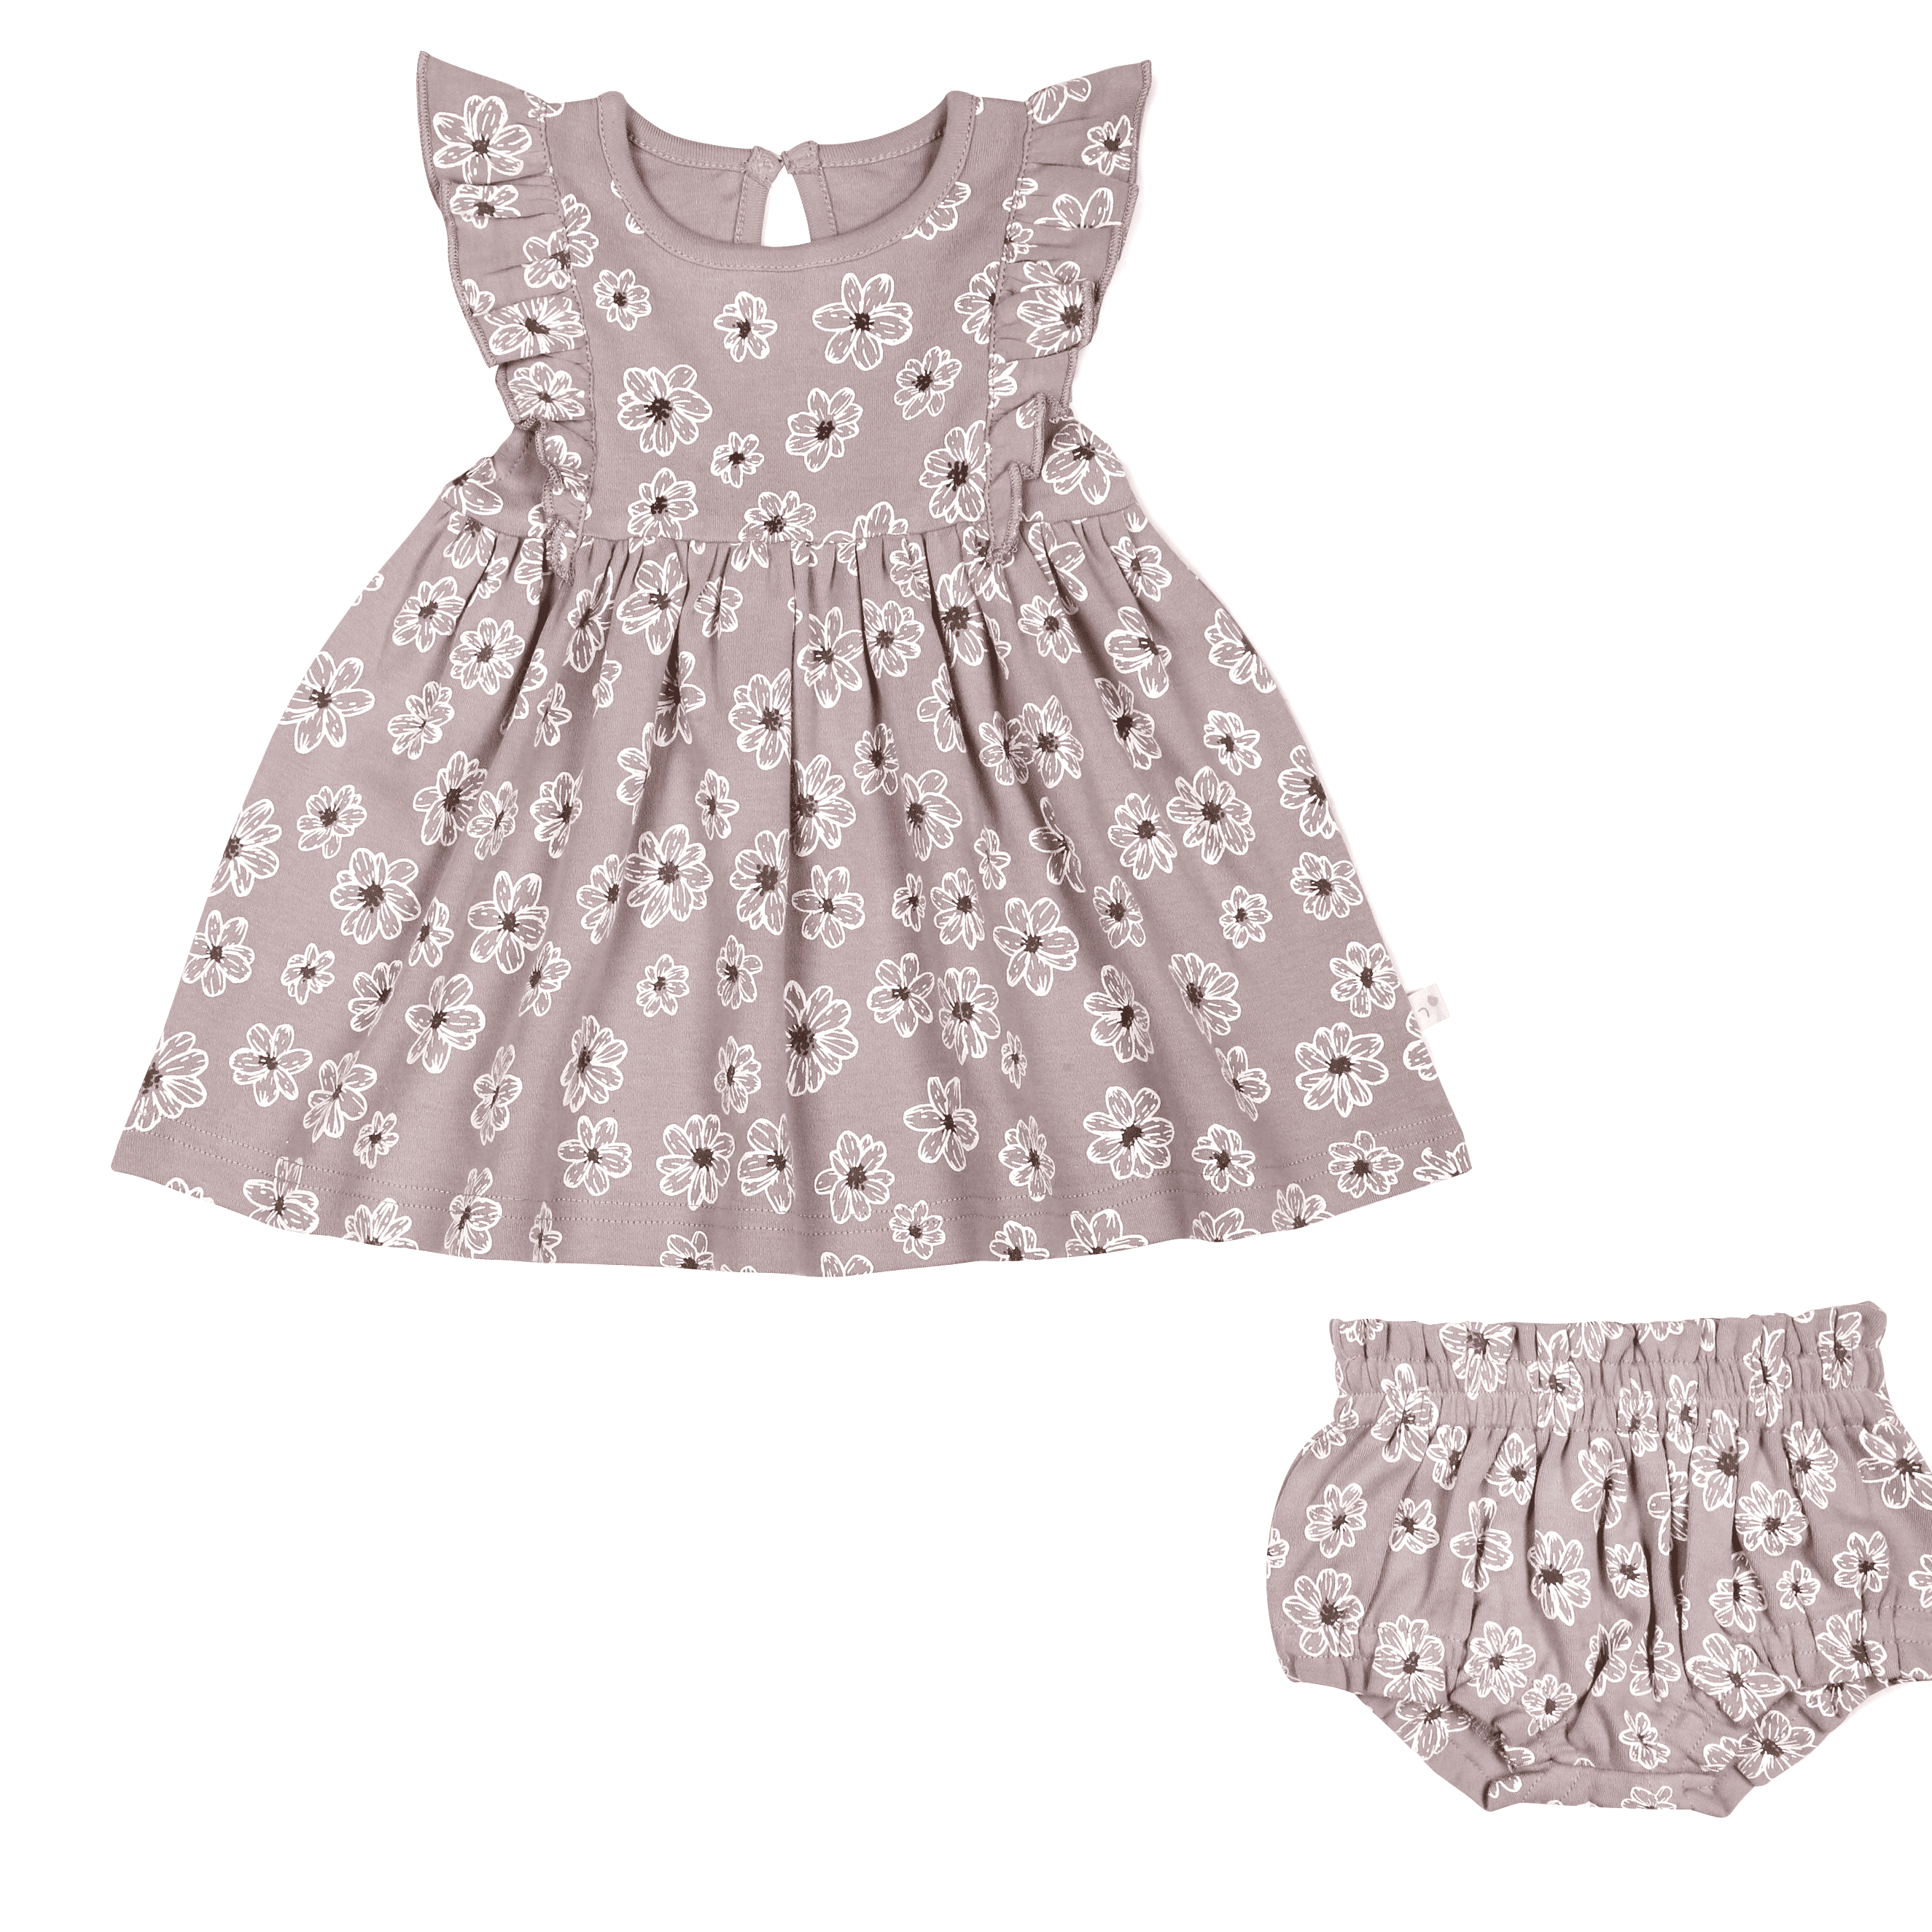 A light brown toddler's dress with white floral patterns and matching bloomers, featuring a gathered waist and flutter sleeves - Organic Flutter Dress in Daisies by Makemake Organics.